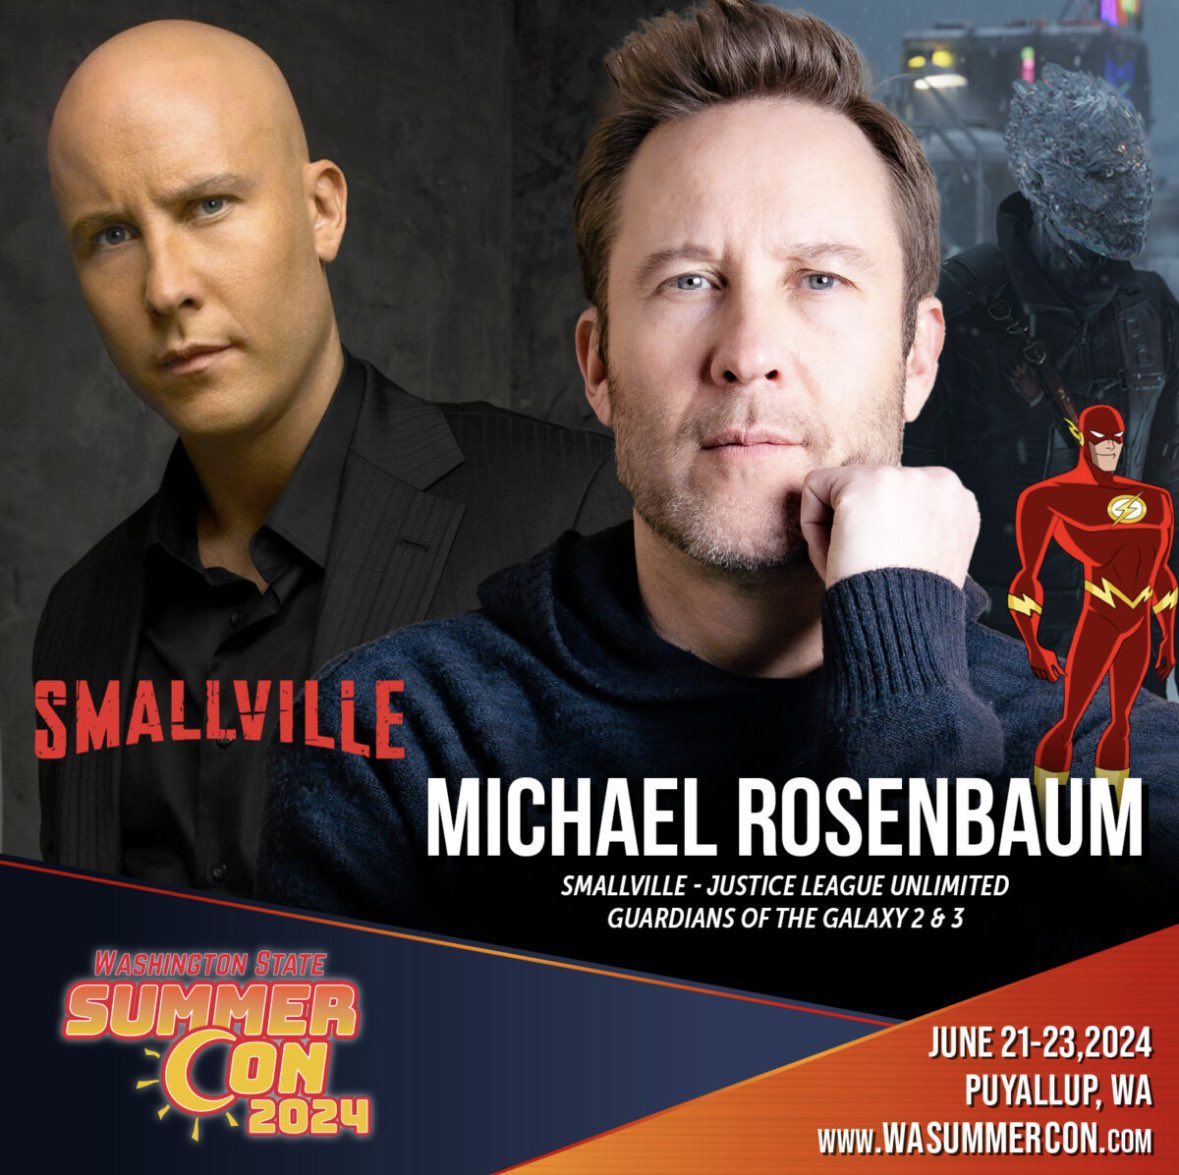 Don’t Miss out on an opportunity to see @michaelrosenbum at the Washington state summer con, June 21 -23  2024  checkout the link and make sure to pick up some tickets wasummercon.com/michael-rosenb…